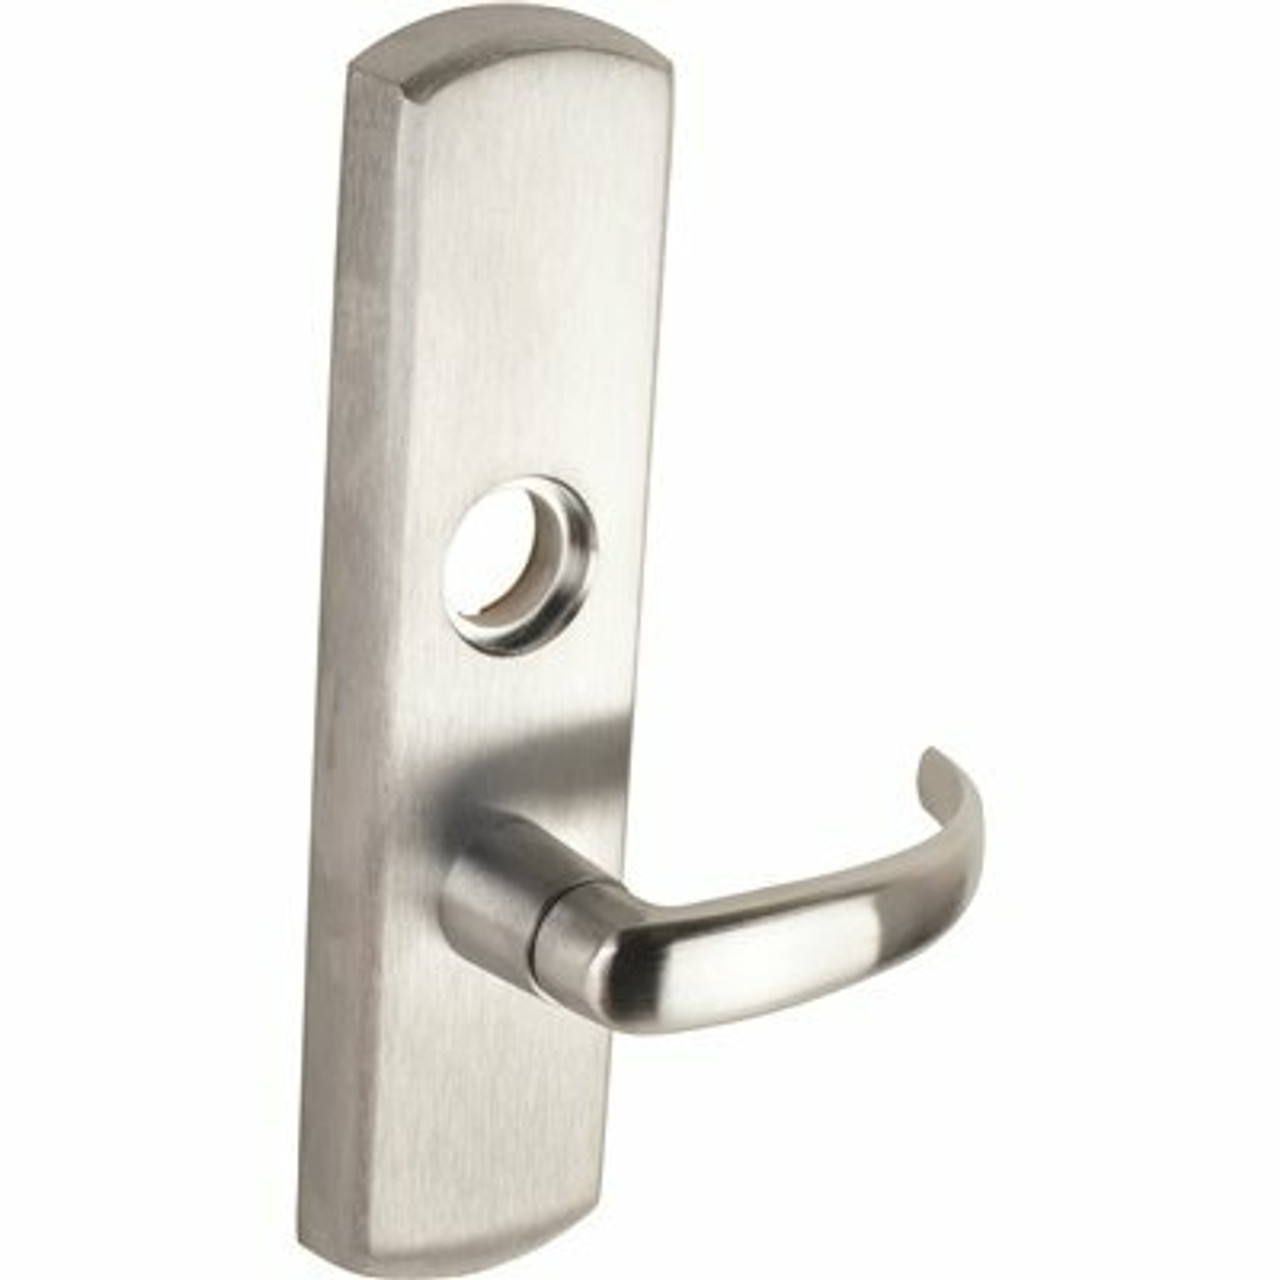 Von Duprin Grade-1 Satin Chrome Exit Device Trim Only, Classroom Function With 17 Lever, Right Hand Reverse - 310013199